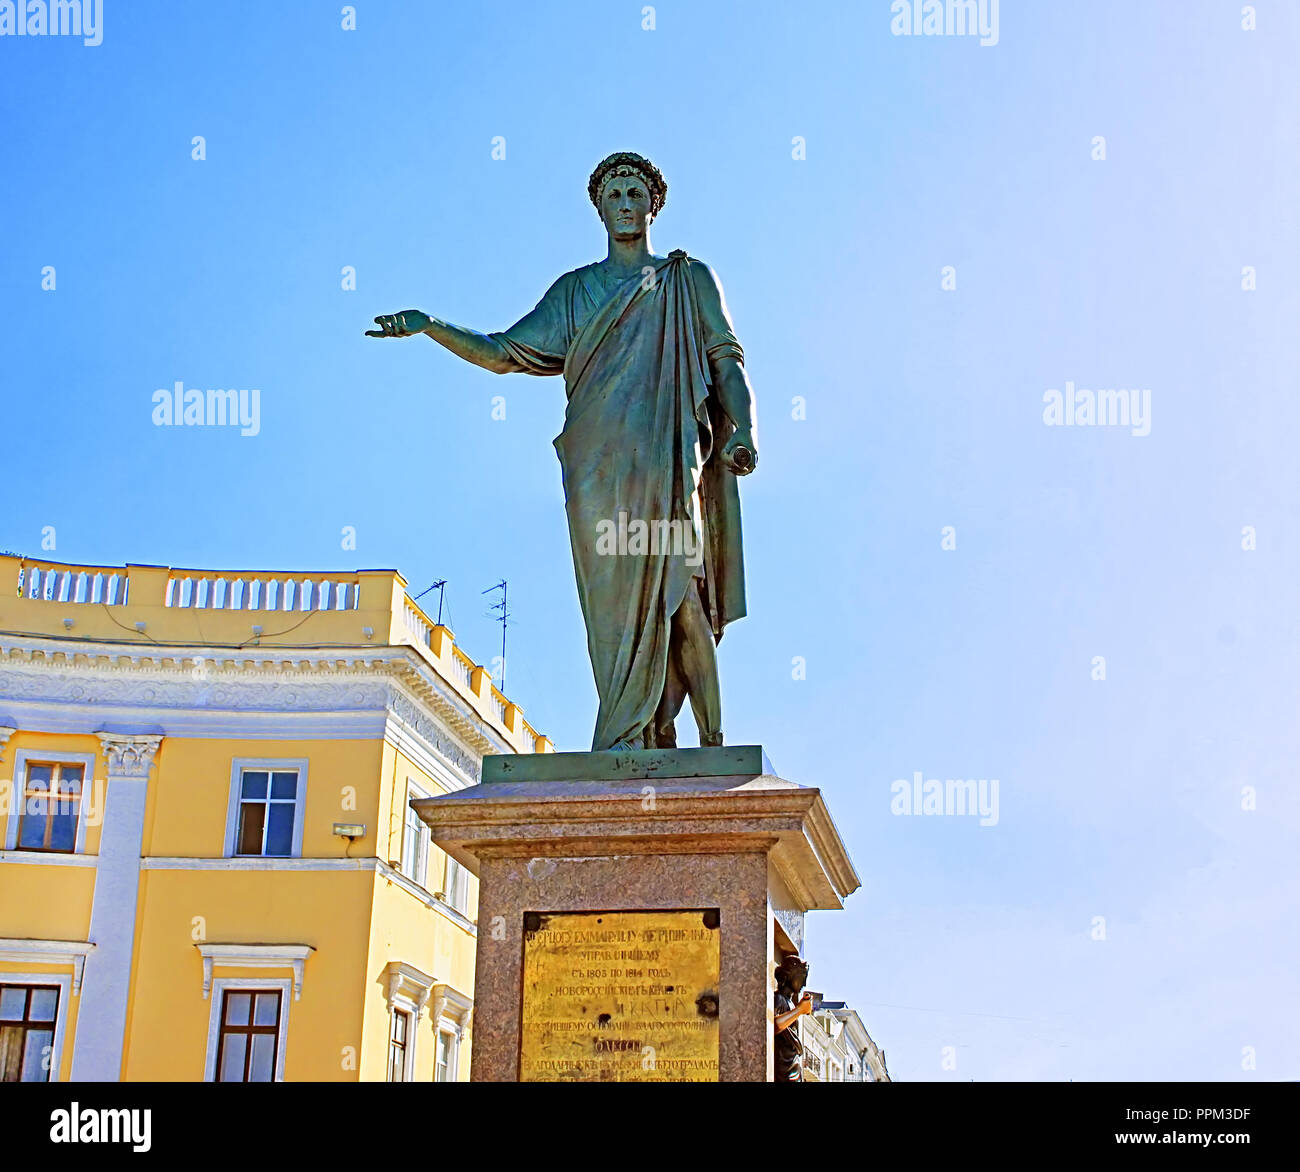 The first monument in the city of Odessa, Ukraine. Monument to Duke de Richelieu in Odessa, opened in 1828 Stock Photo